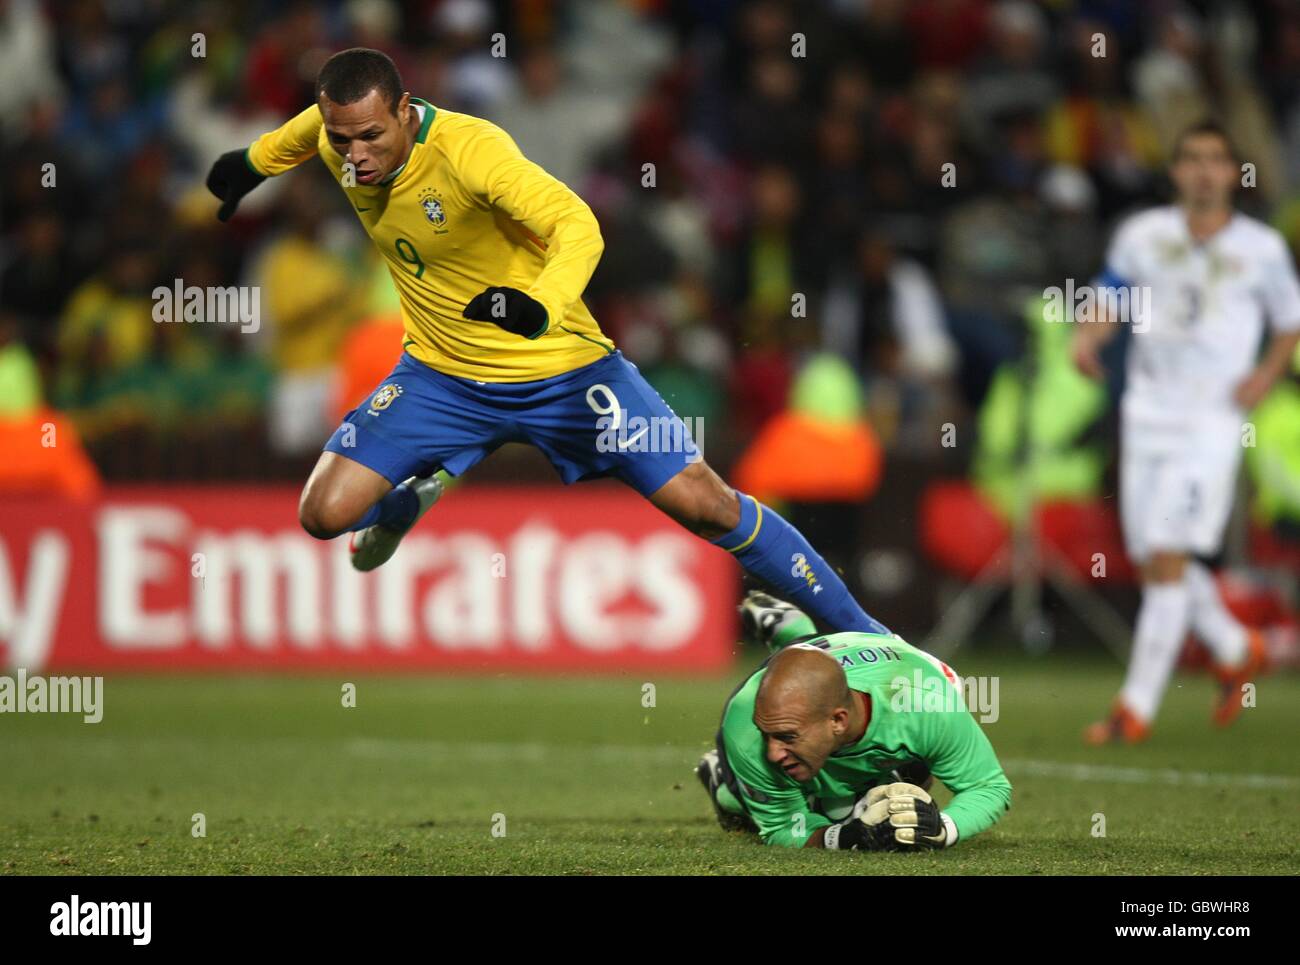 Soccer - 2009 FIFA Confederations Cup - Final - USA v Brazil - Ellis Park. Brazil's Luis Fabiano (left) jumps over USA's goalkeeper Tim Howard after he saves his shot on goal (right) Stock Photo